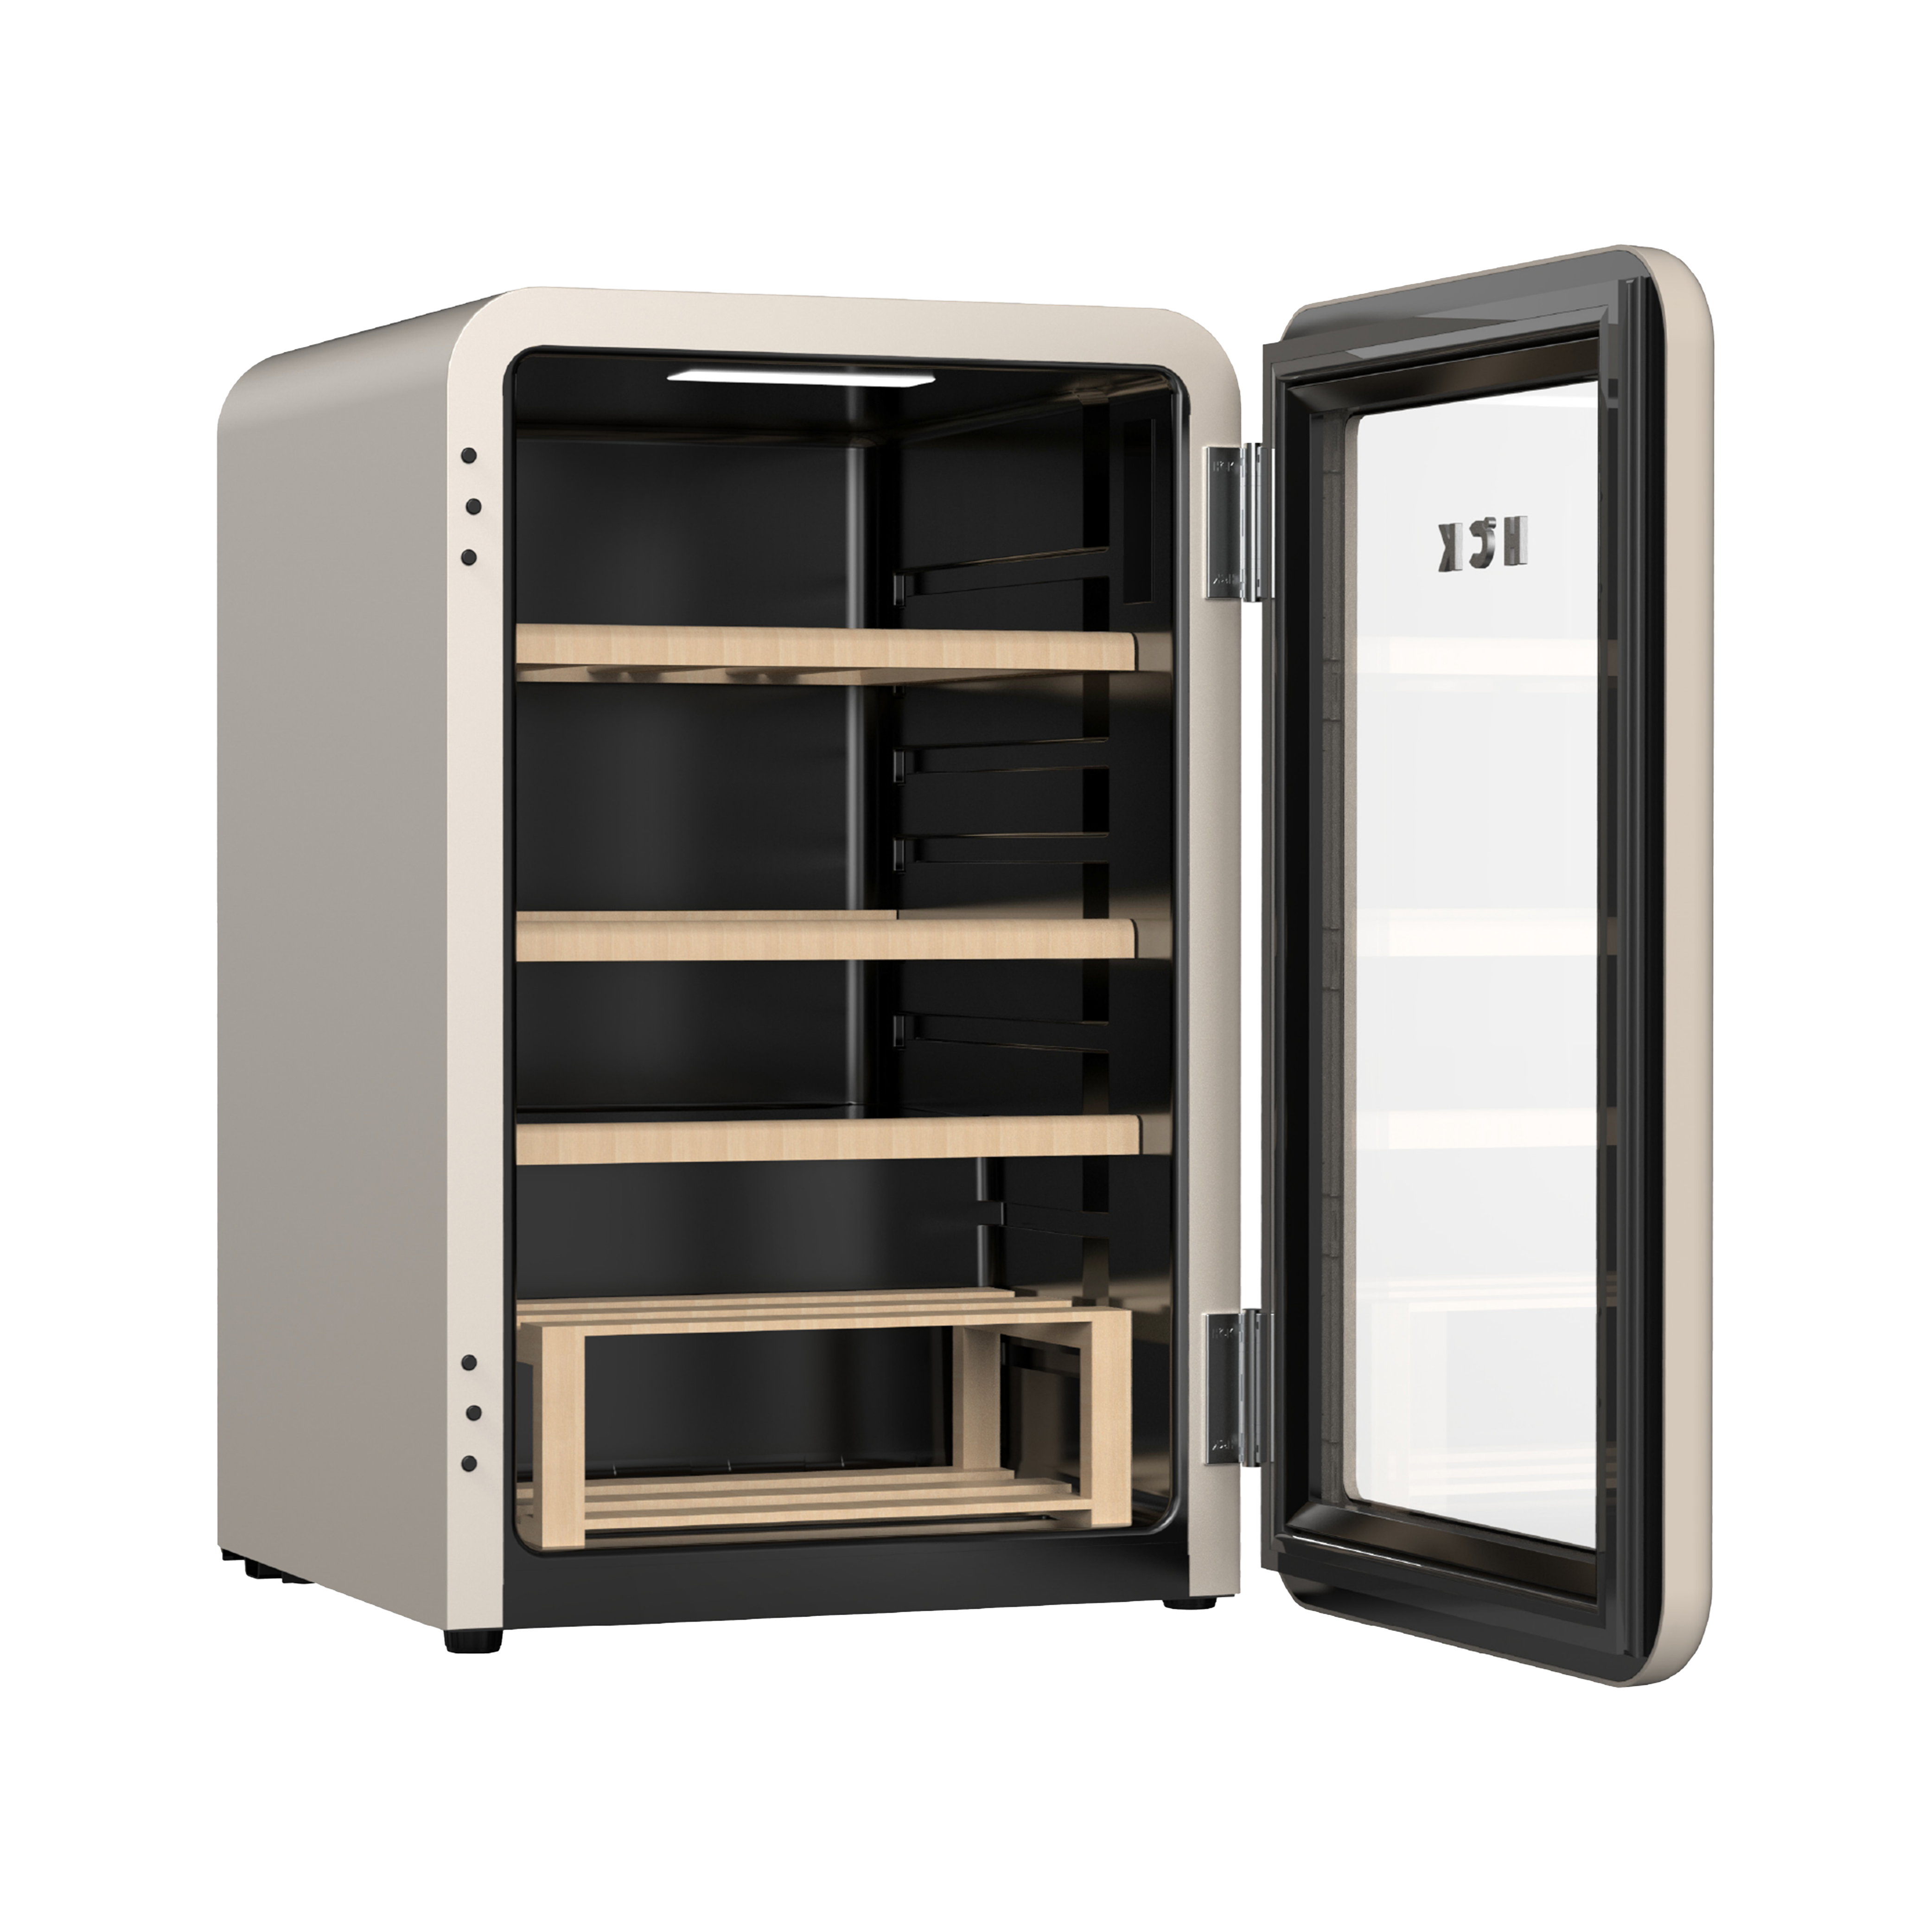 Side view of a 2.5 Cu Ft Warm Grey Iconic Retro Style Wine Fridge with open door, displaying four wooden shelves